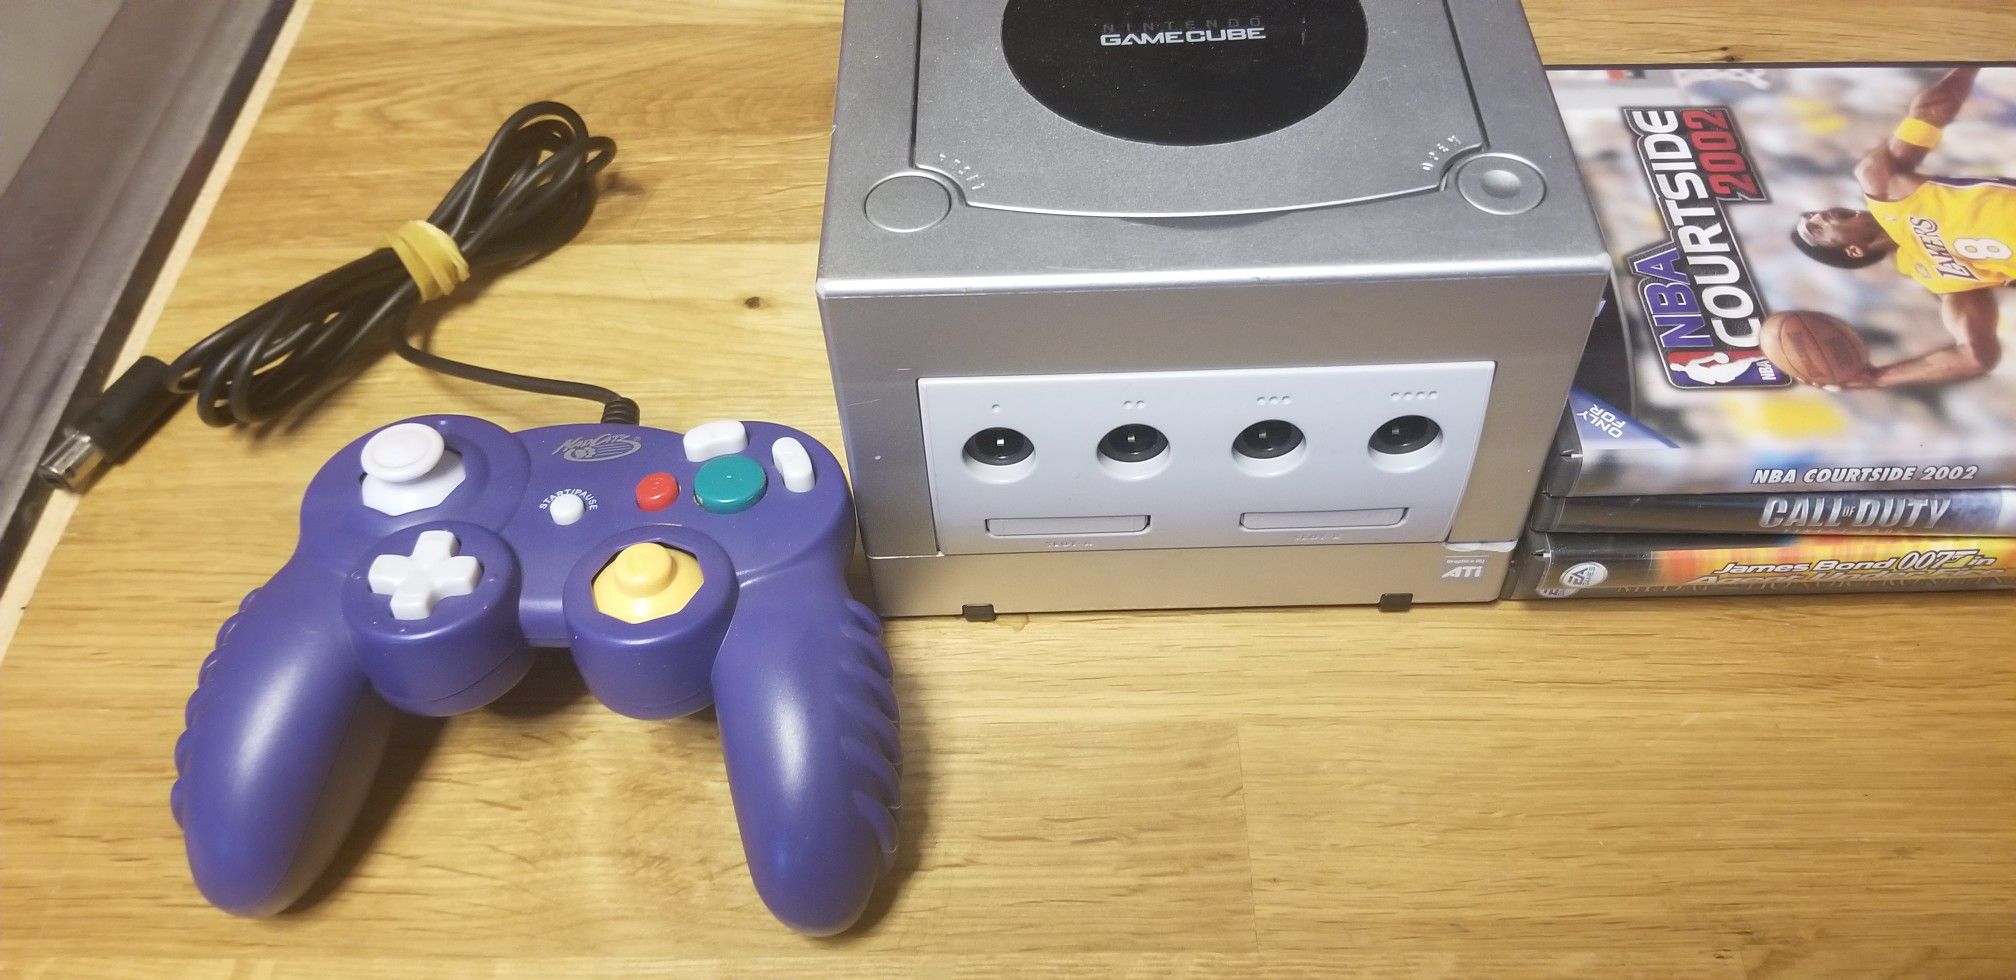 Gamecube with Games